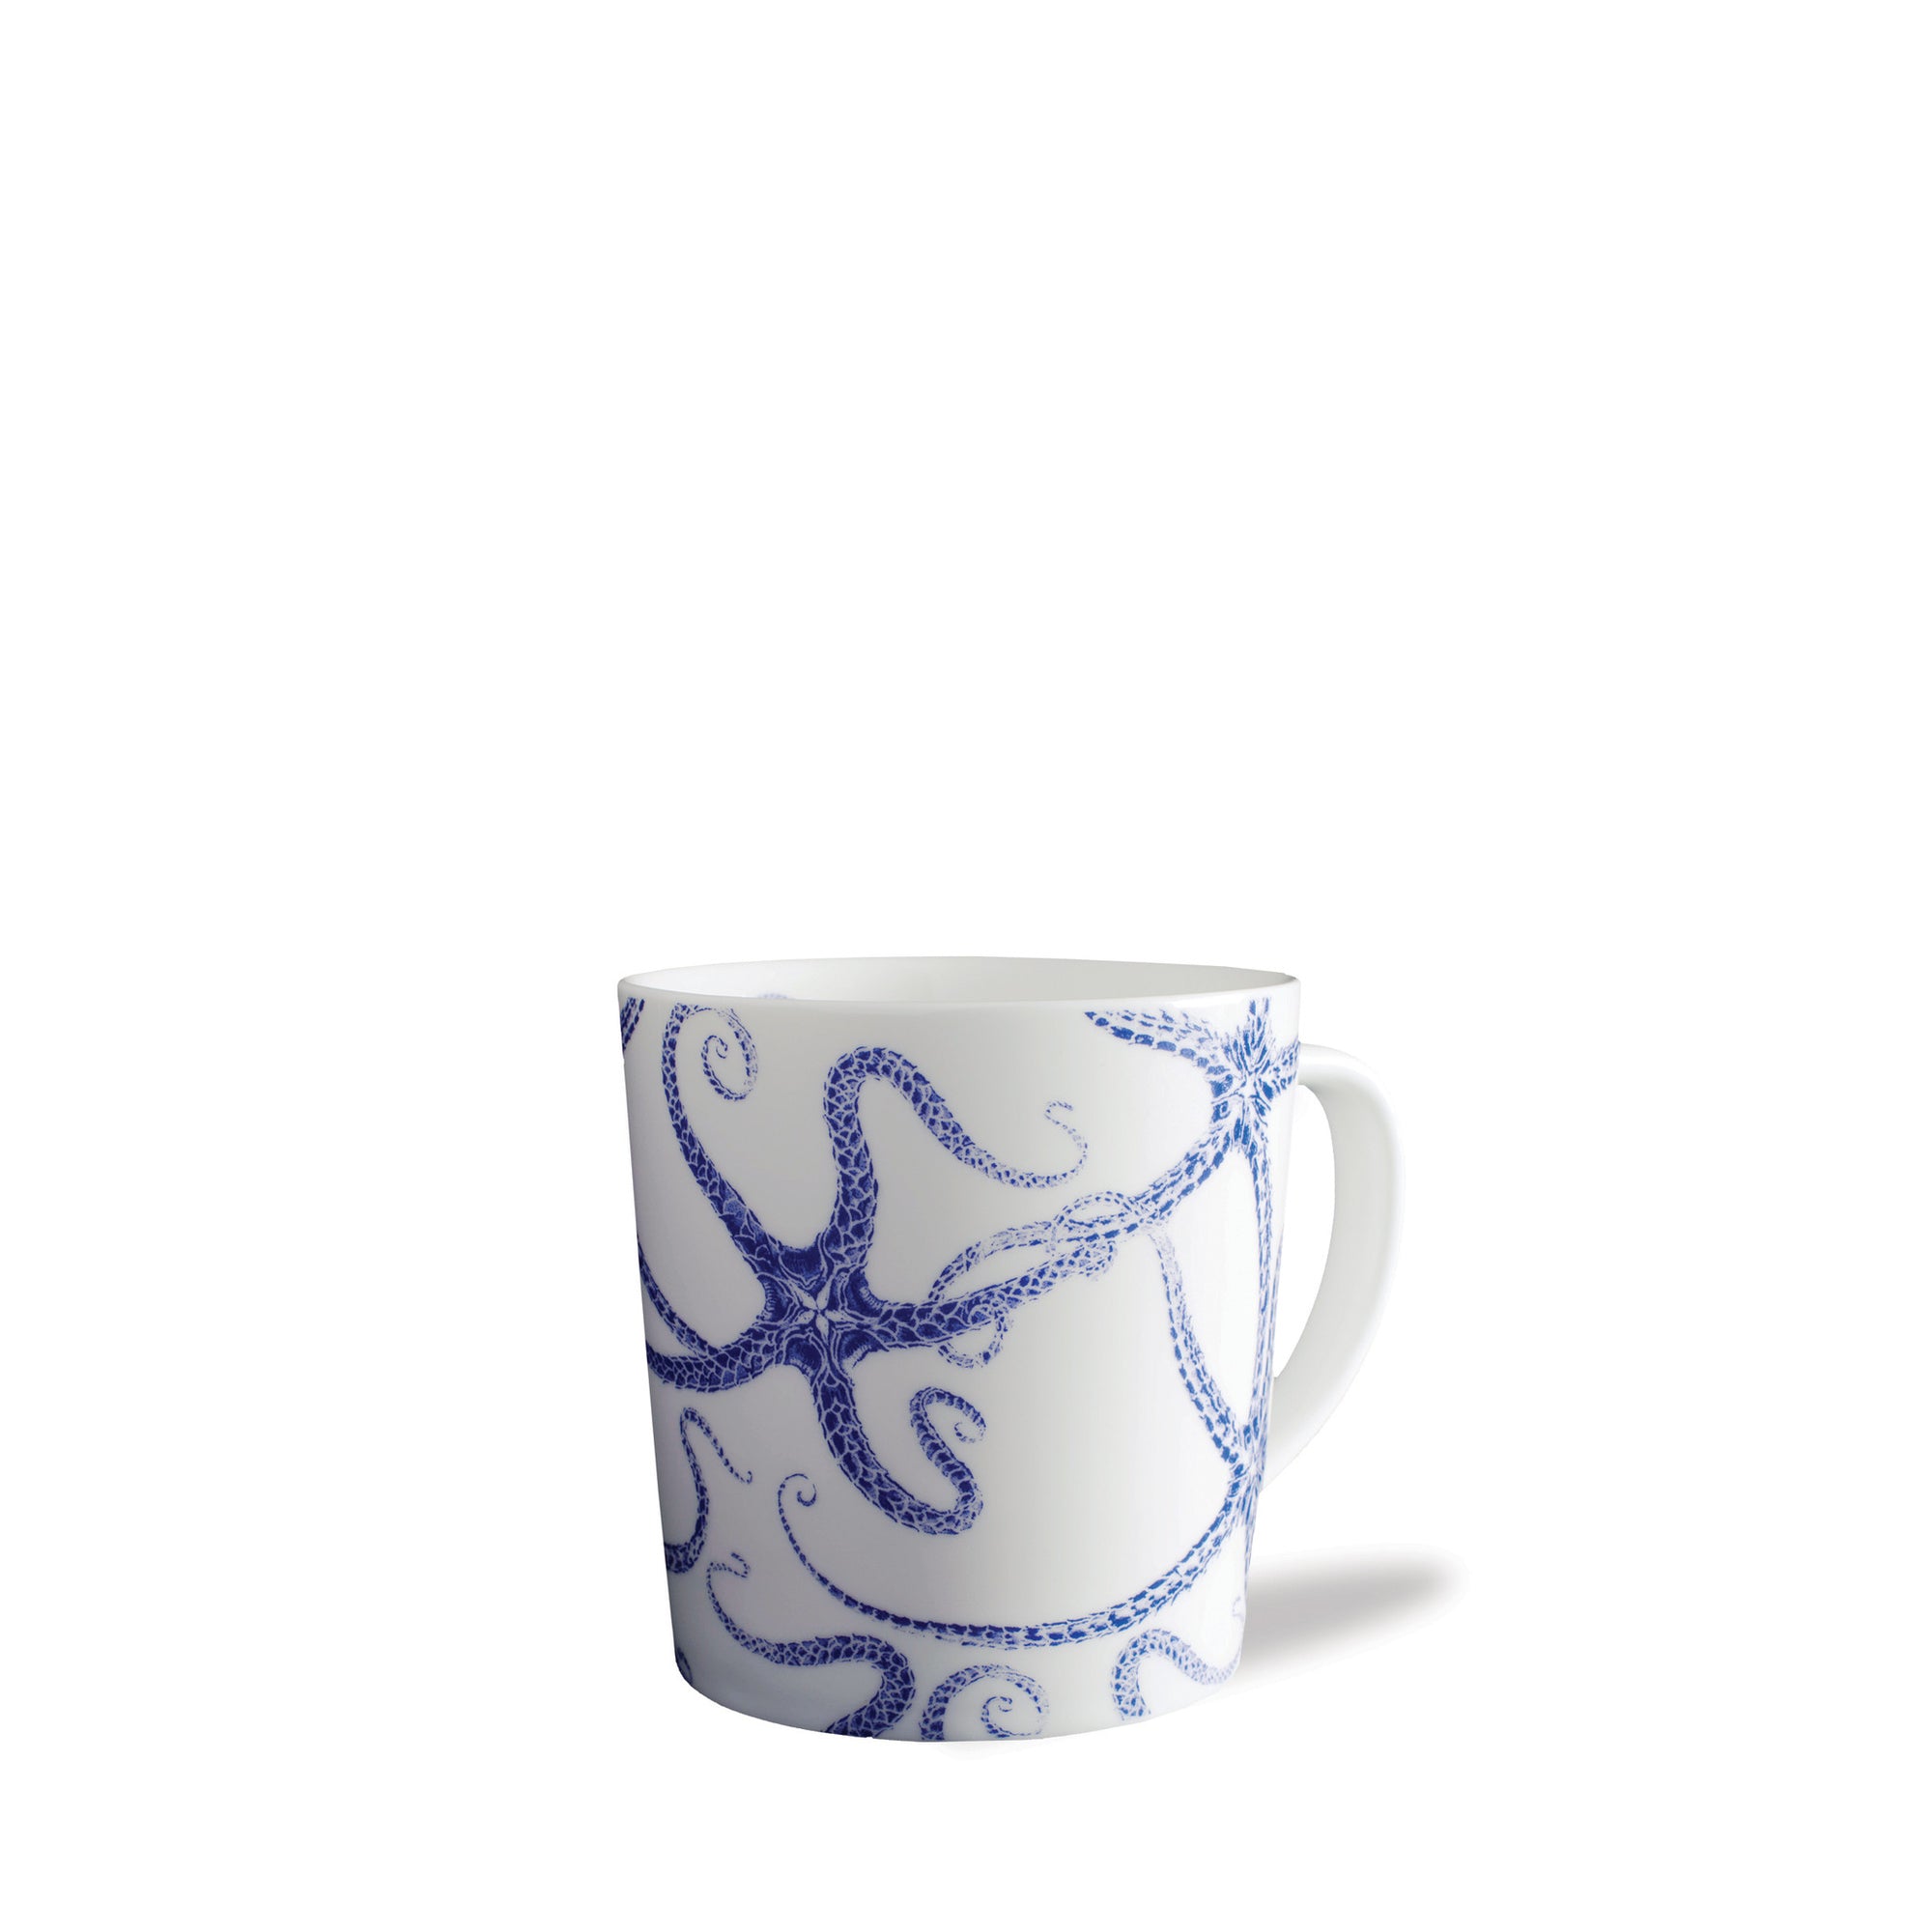 High-fired porcelain Starfish Mug by Caskata Artisanal Home with a blue octopus design; it's dishwasher safe and perfect for ocean lovers.